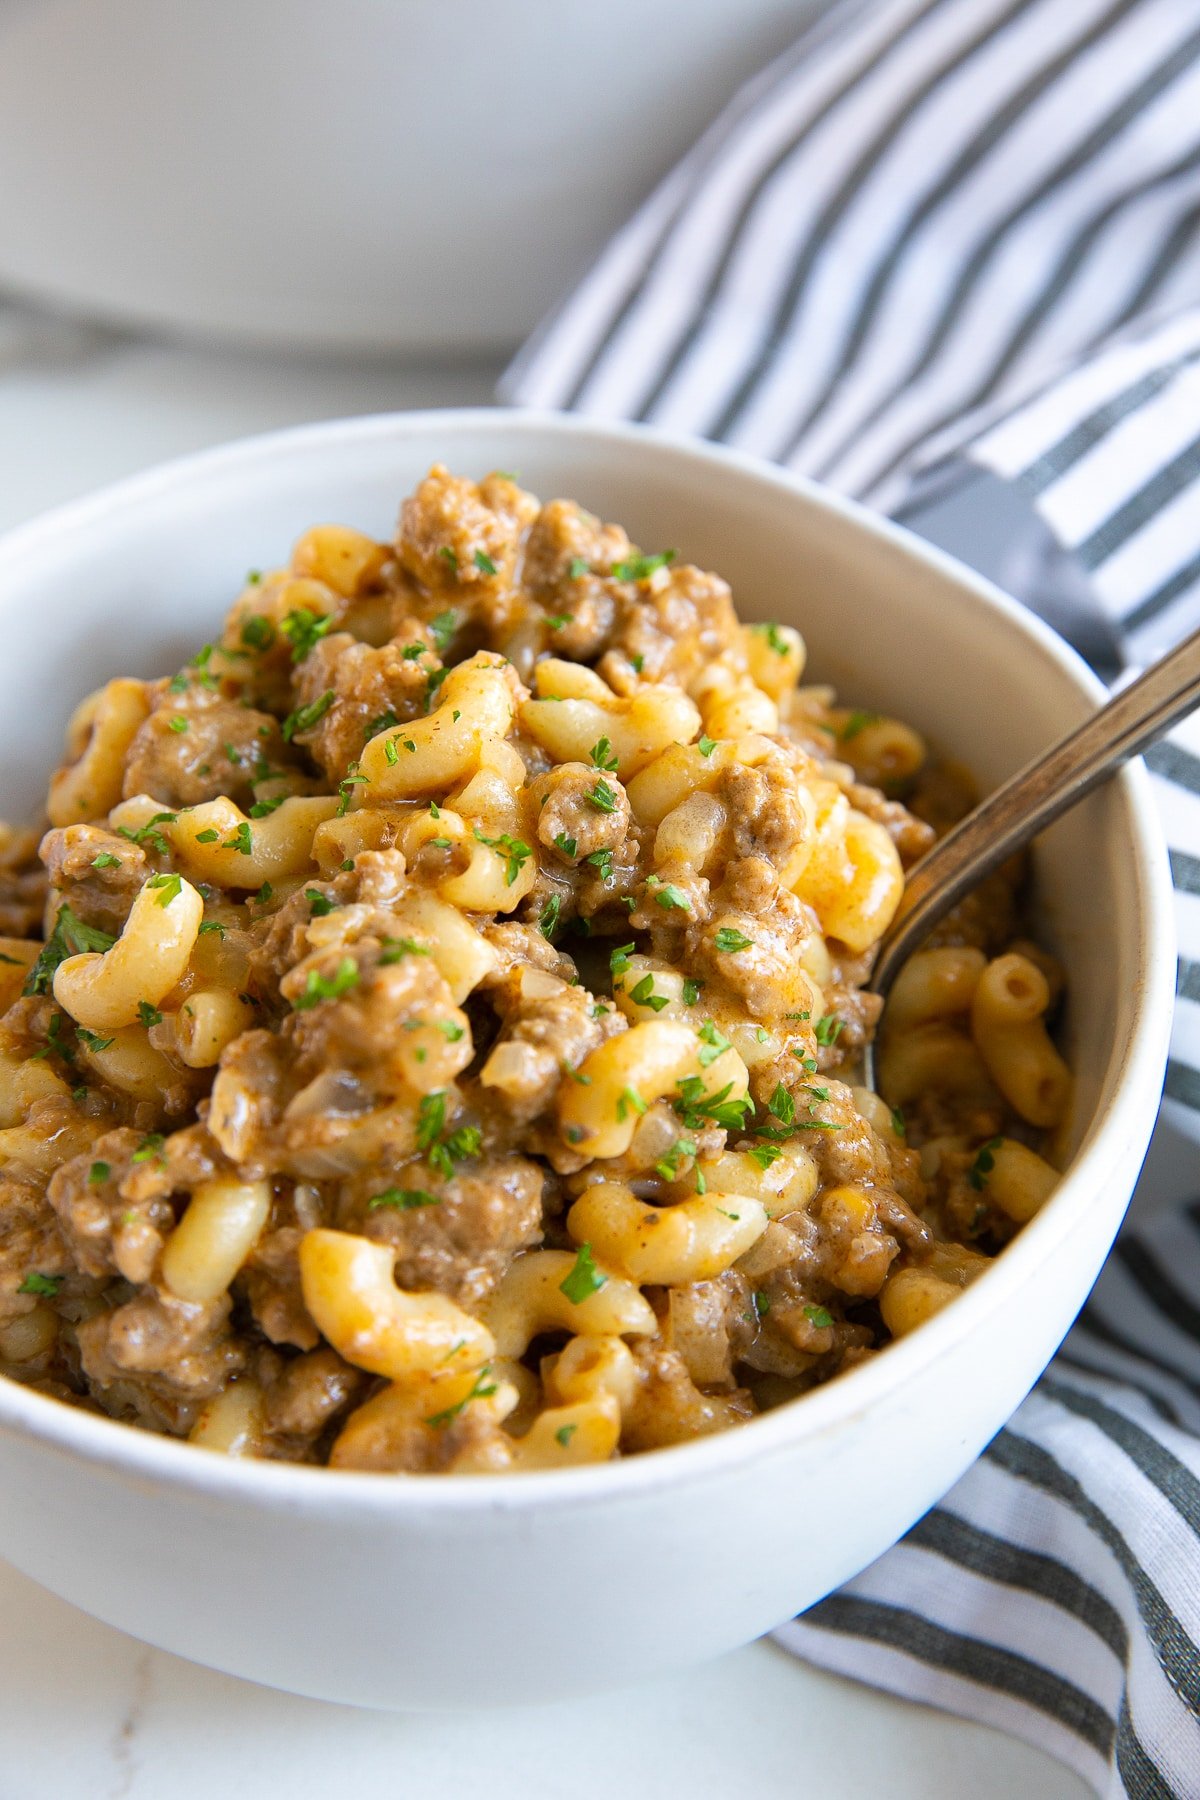 Image of a white bowl filled with homemade one-pot hamburger helper made with ground beef and macaroni noodles garnished with minced parsley.